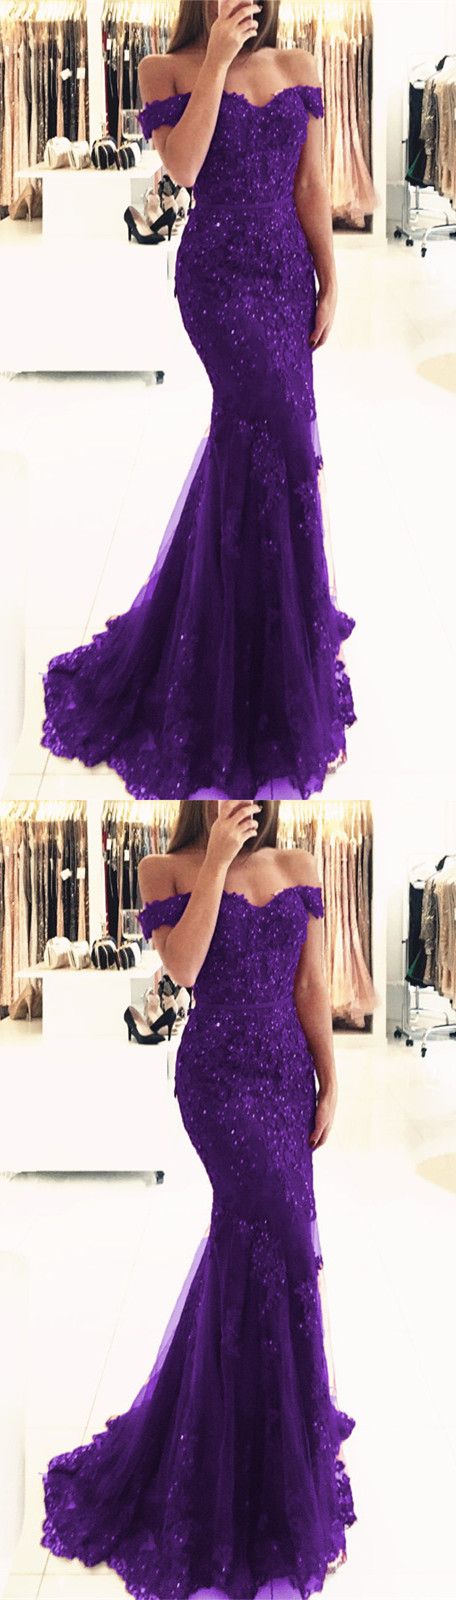 purple lace mermaid prom dresses beaded v neck evening gowns off the shoulder prom dress,2018 Plus Size Women Party Dresses,Girls Pageant Gowns ,A Line Party Dresses 